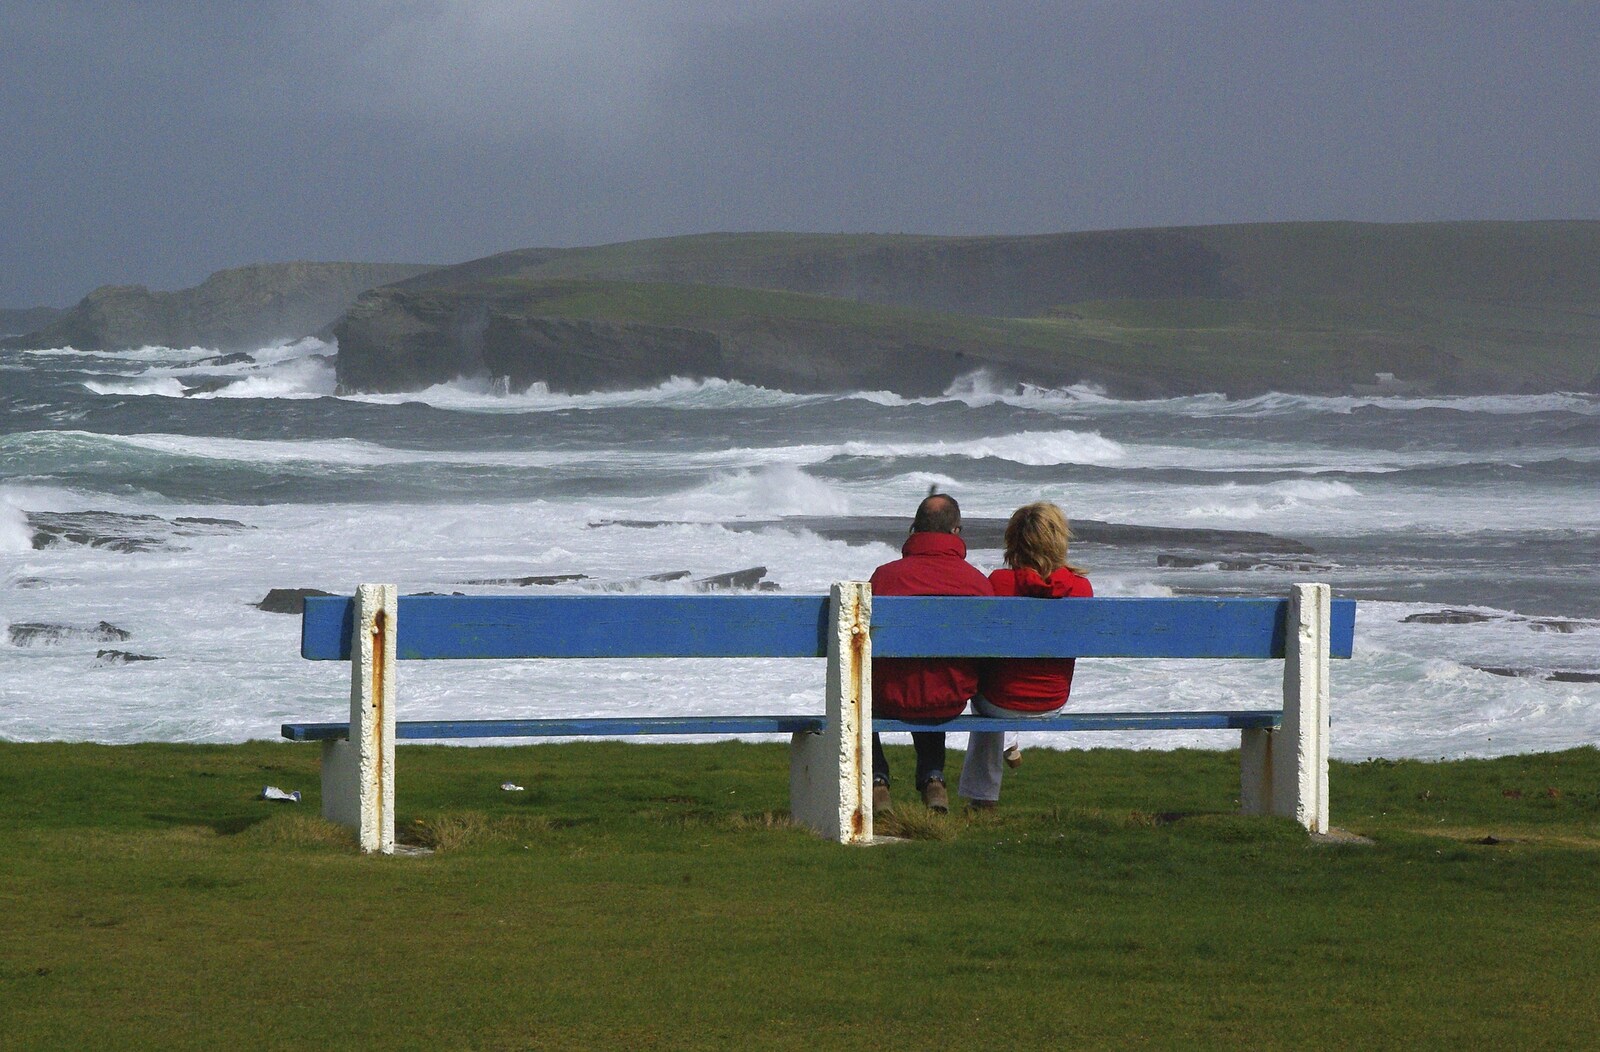 30th Birthday Party in Kilkee, County Clare, Ireland - 22nd September 2007: A couple look out to sea